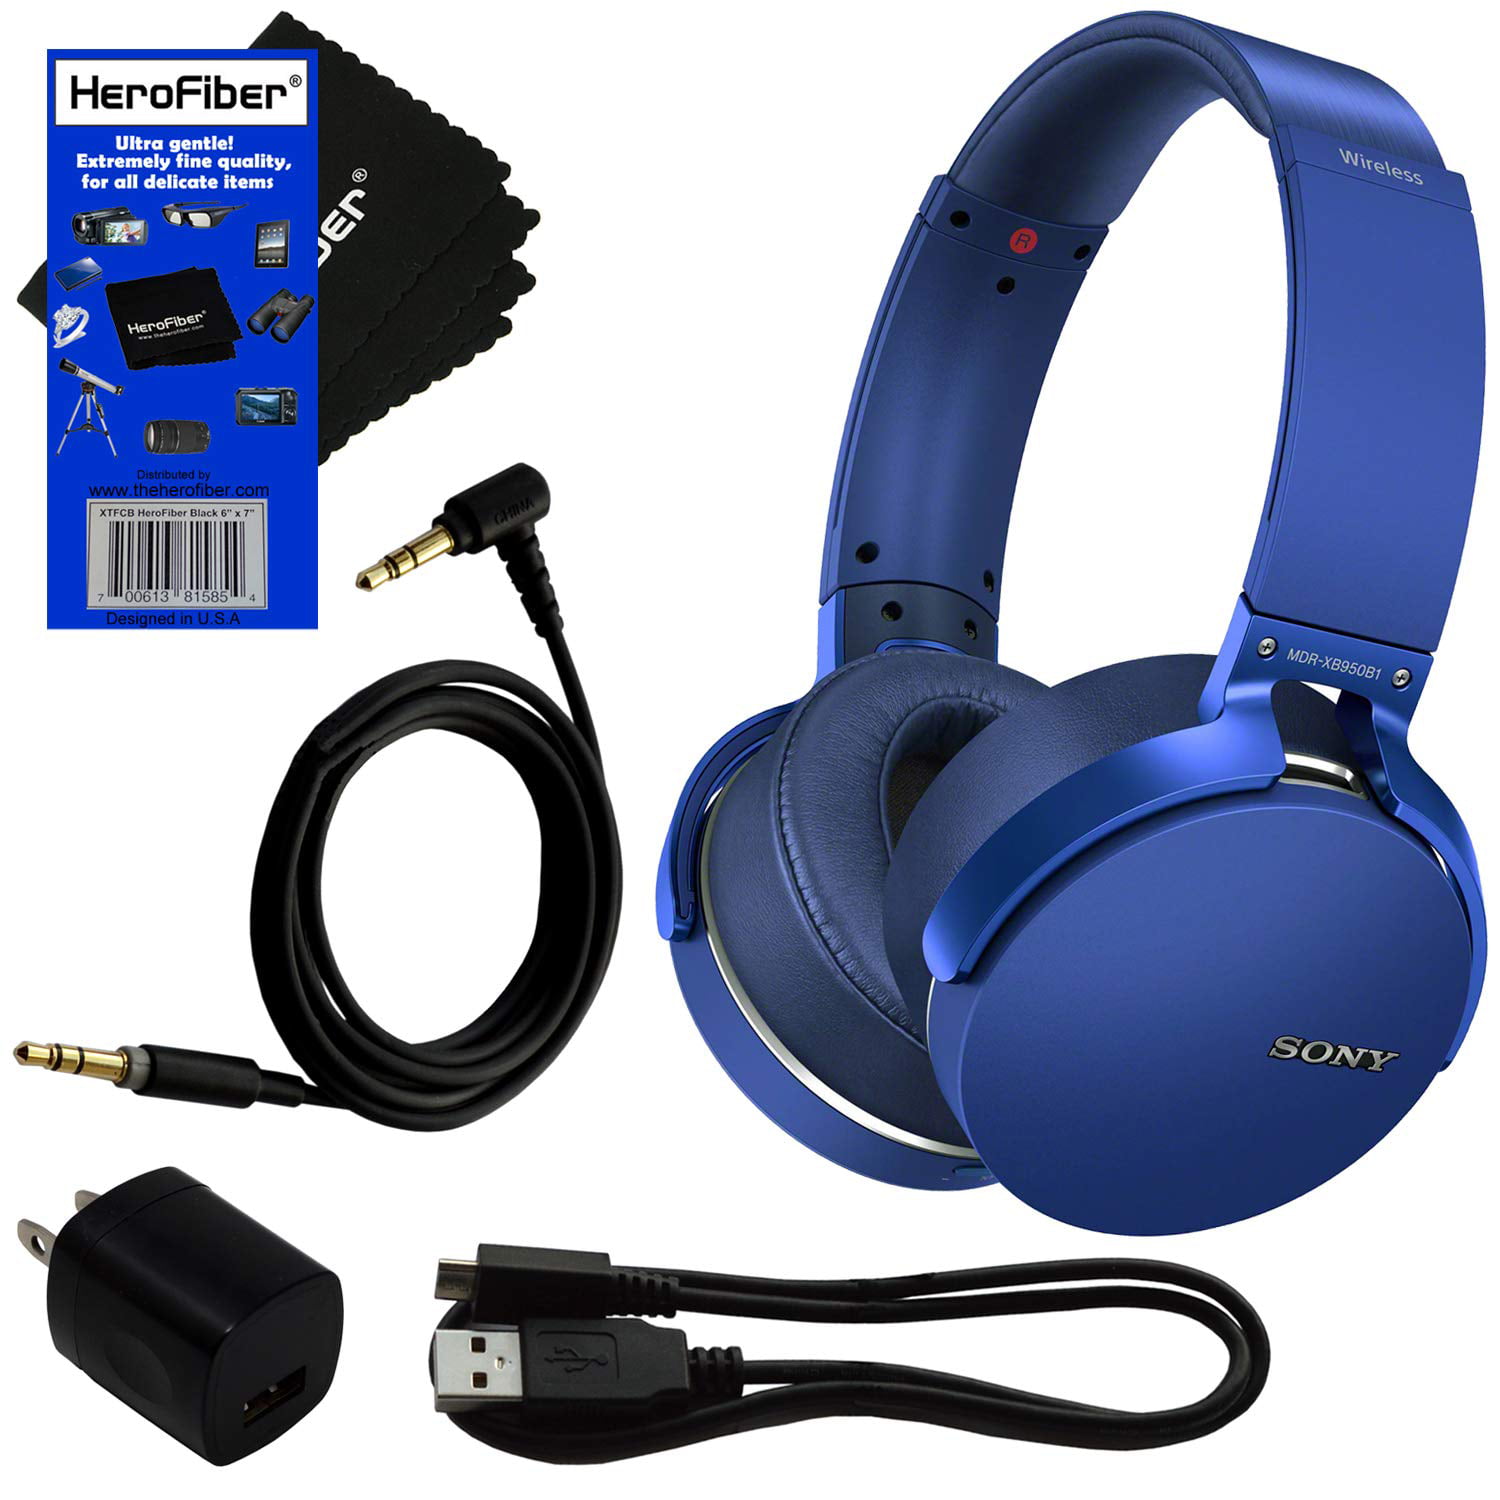 Sony Bluetooth Wireless Over Ear Headphones With Extra Bass App Control Mdrxb950b1 Blue Usb Cable Wall Charger Headphone Cable Herofiber Cleaning Cloth Walmart Com Walmart Com